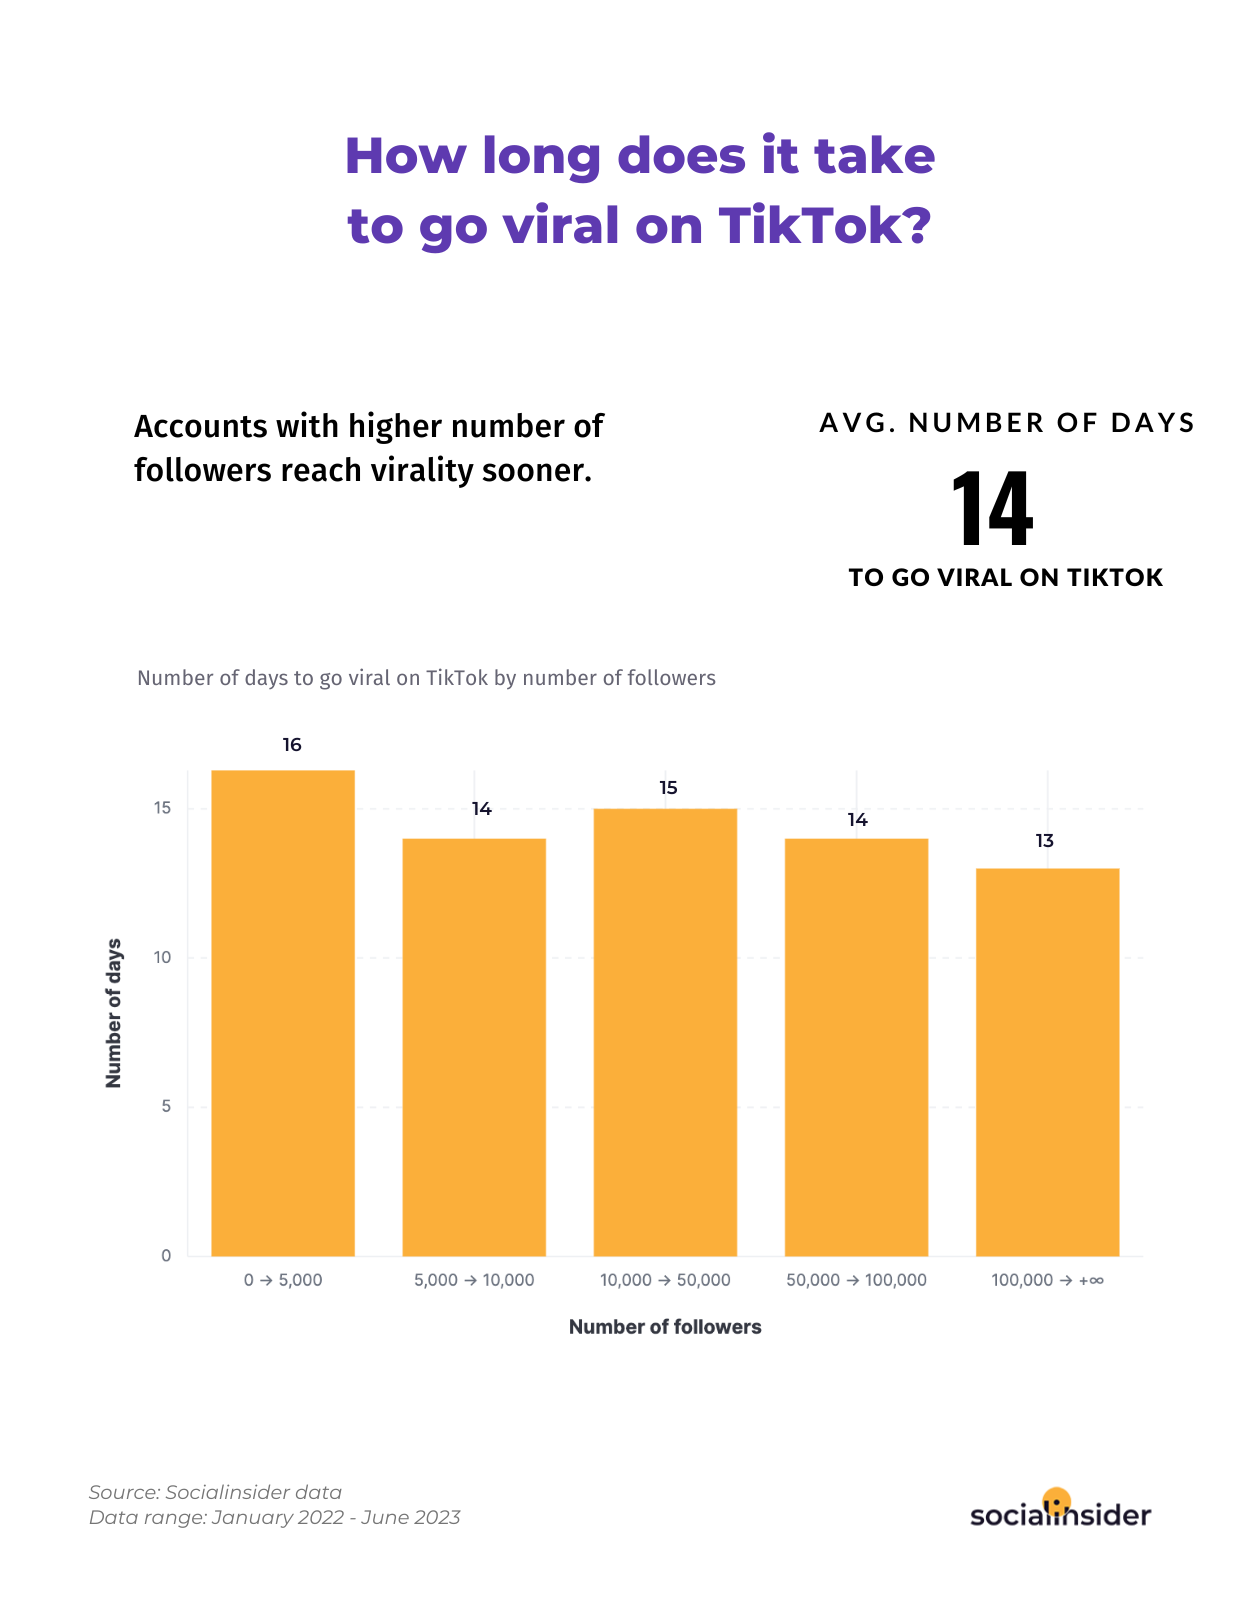 How long does it take to go viral on TikTok